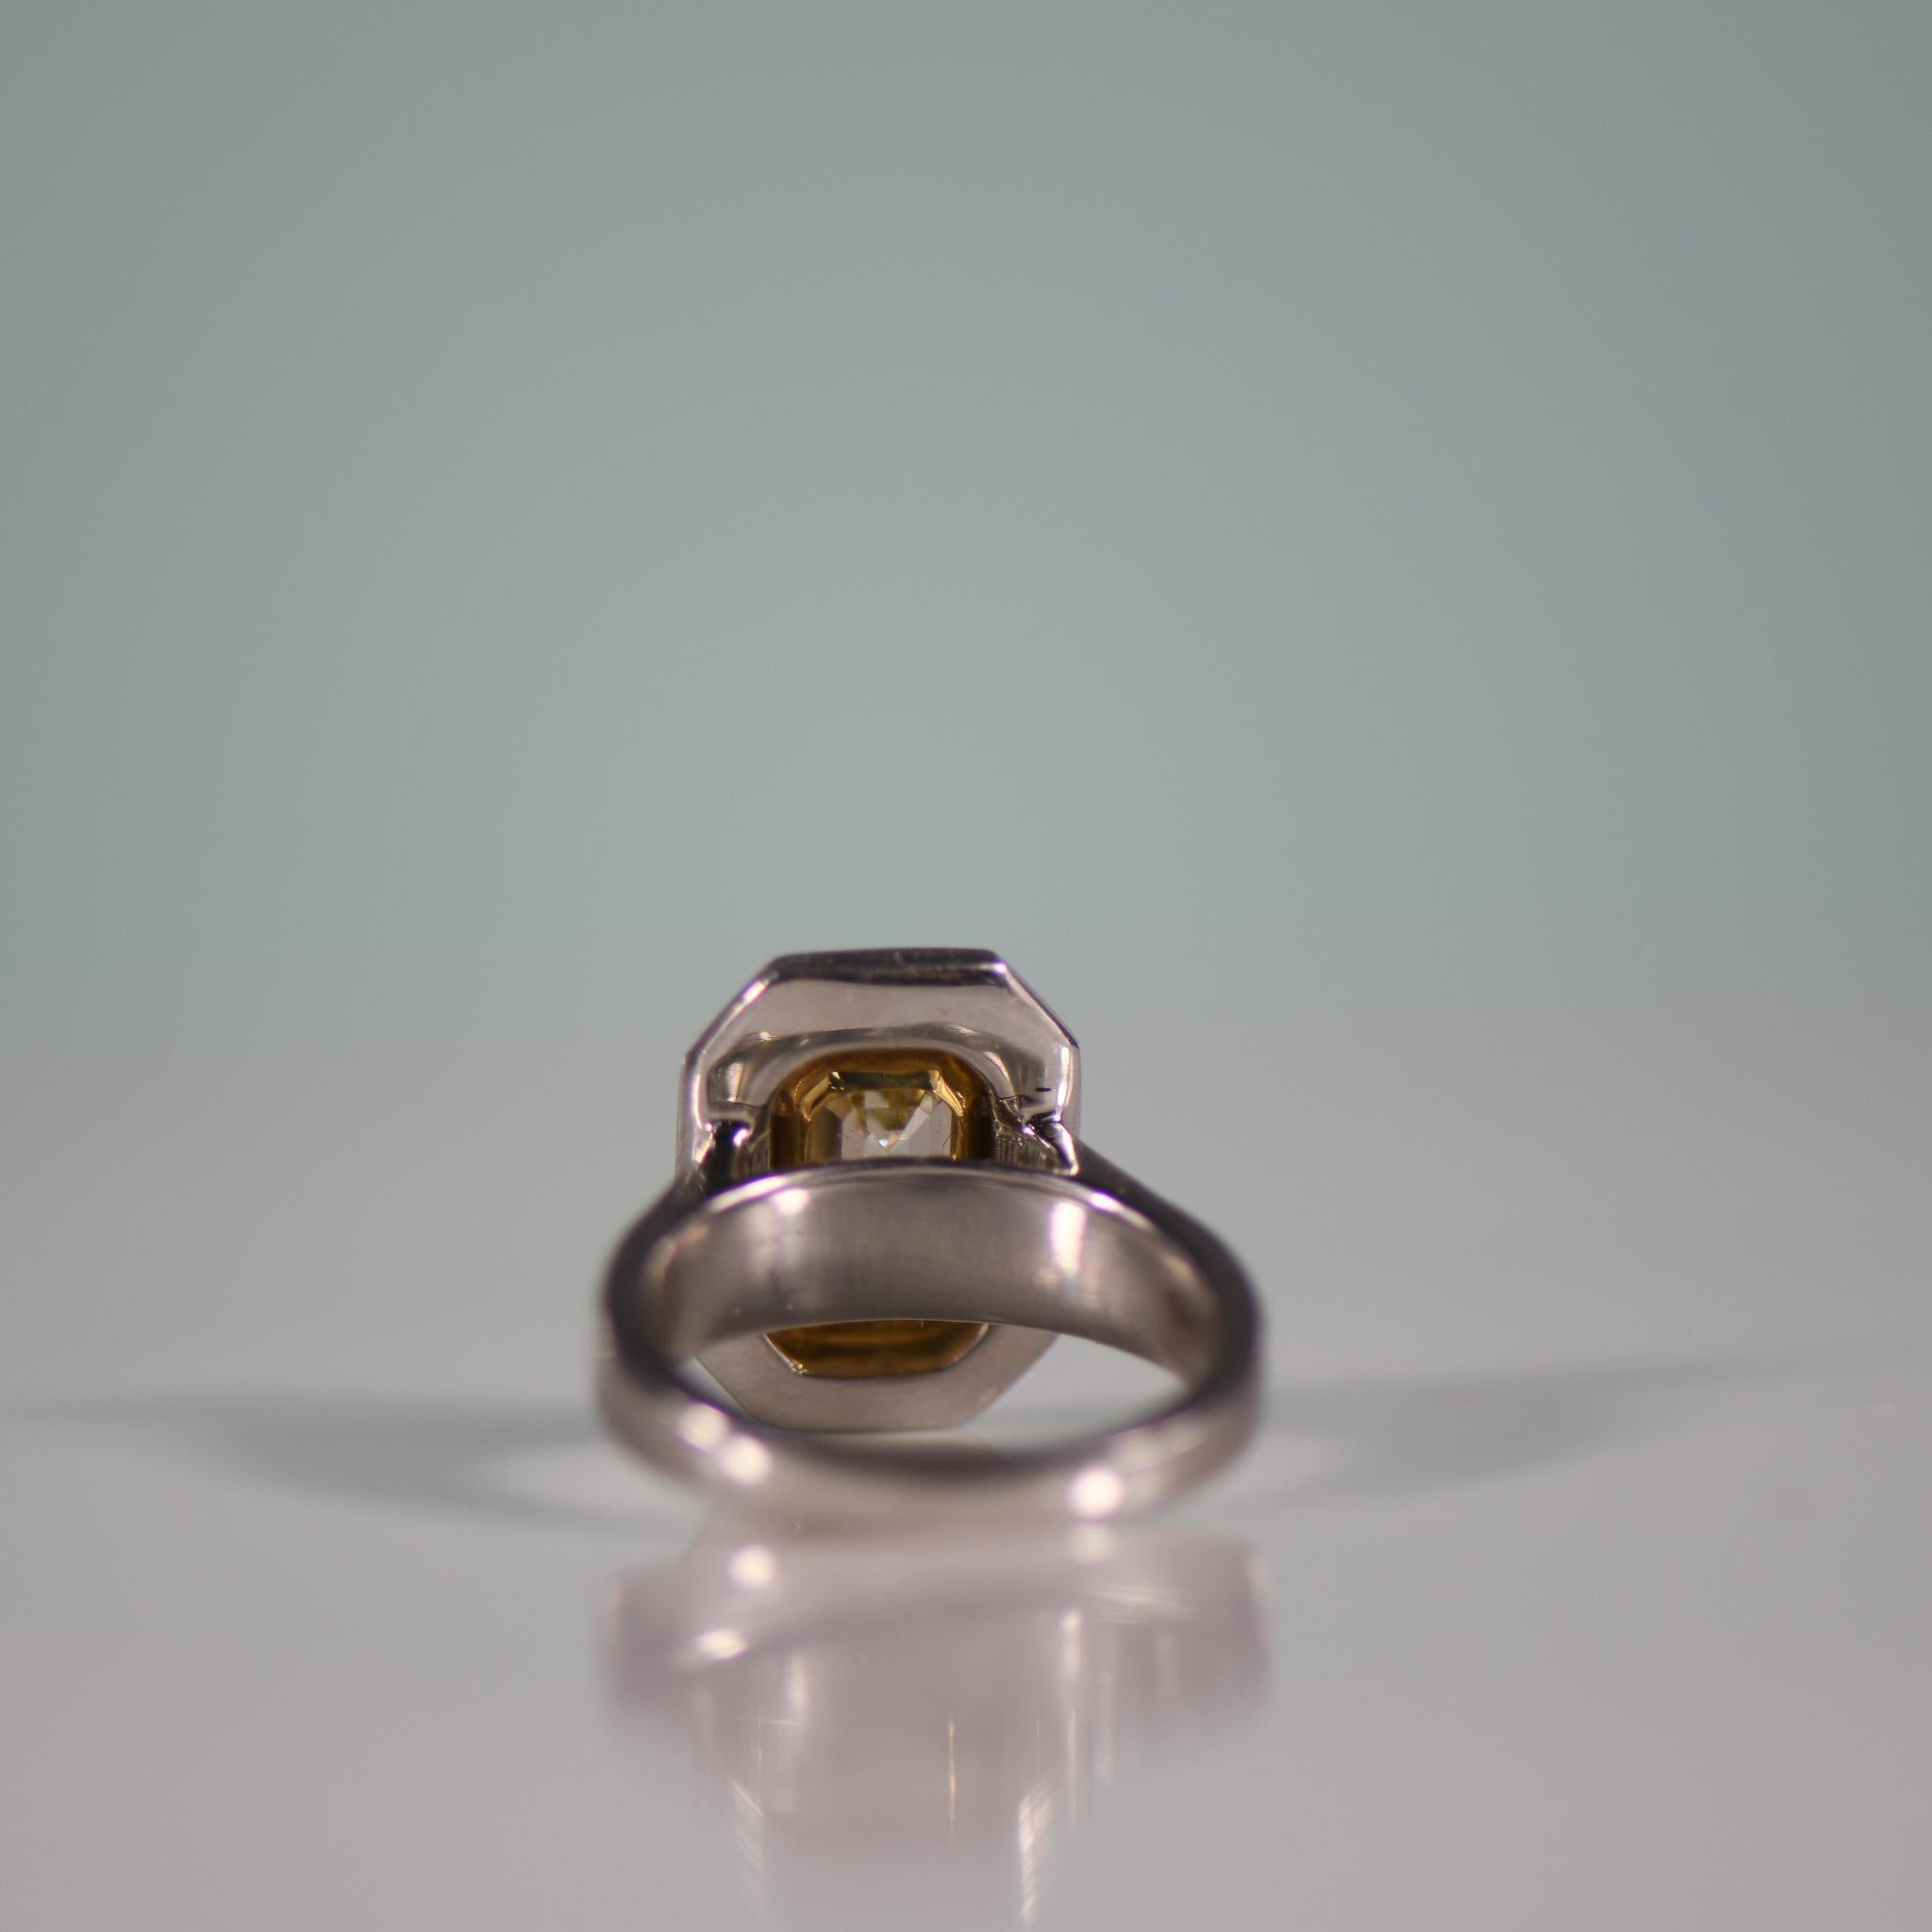 Stunning 3.5 Carat Natural Yellow Emerald Cut Diamond in Custom Platinum Ring In Good Condition For Sale In Addison, TX